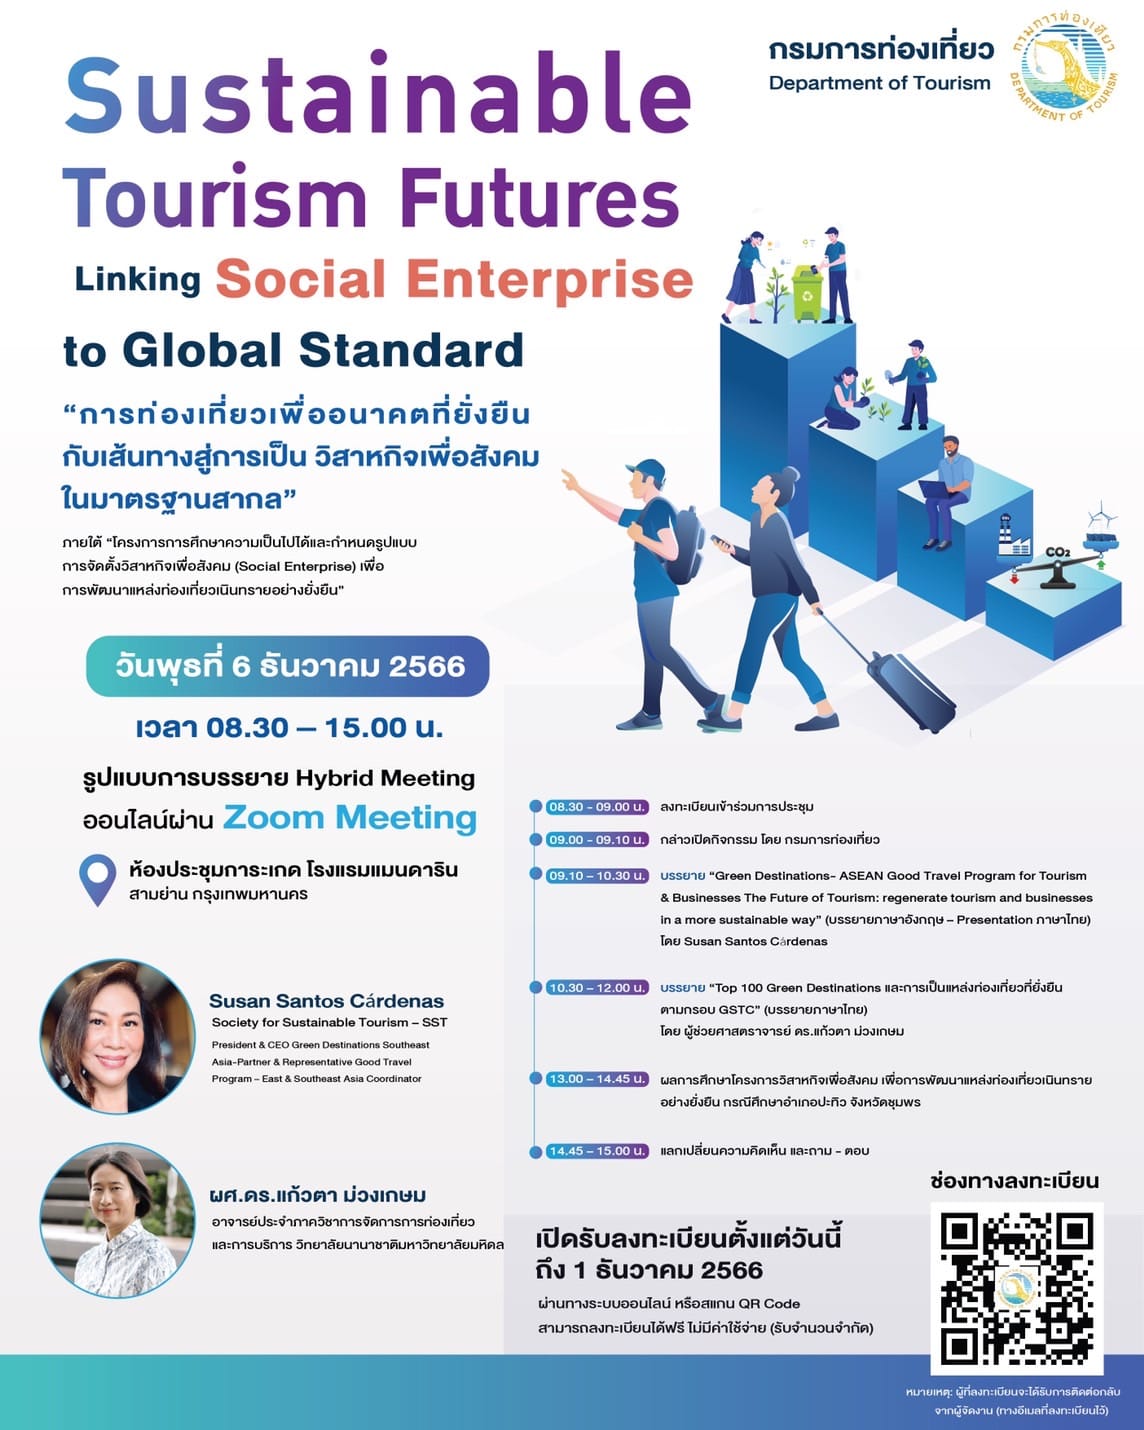 “Sustainable Tourism Futures Linking Social Enterprise to Global Standard”